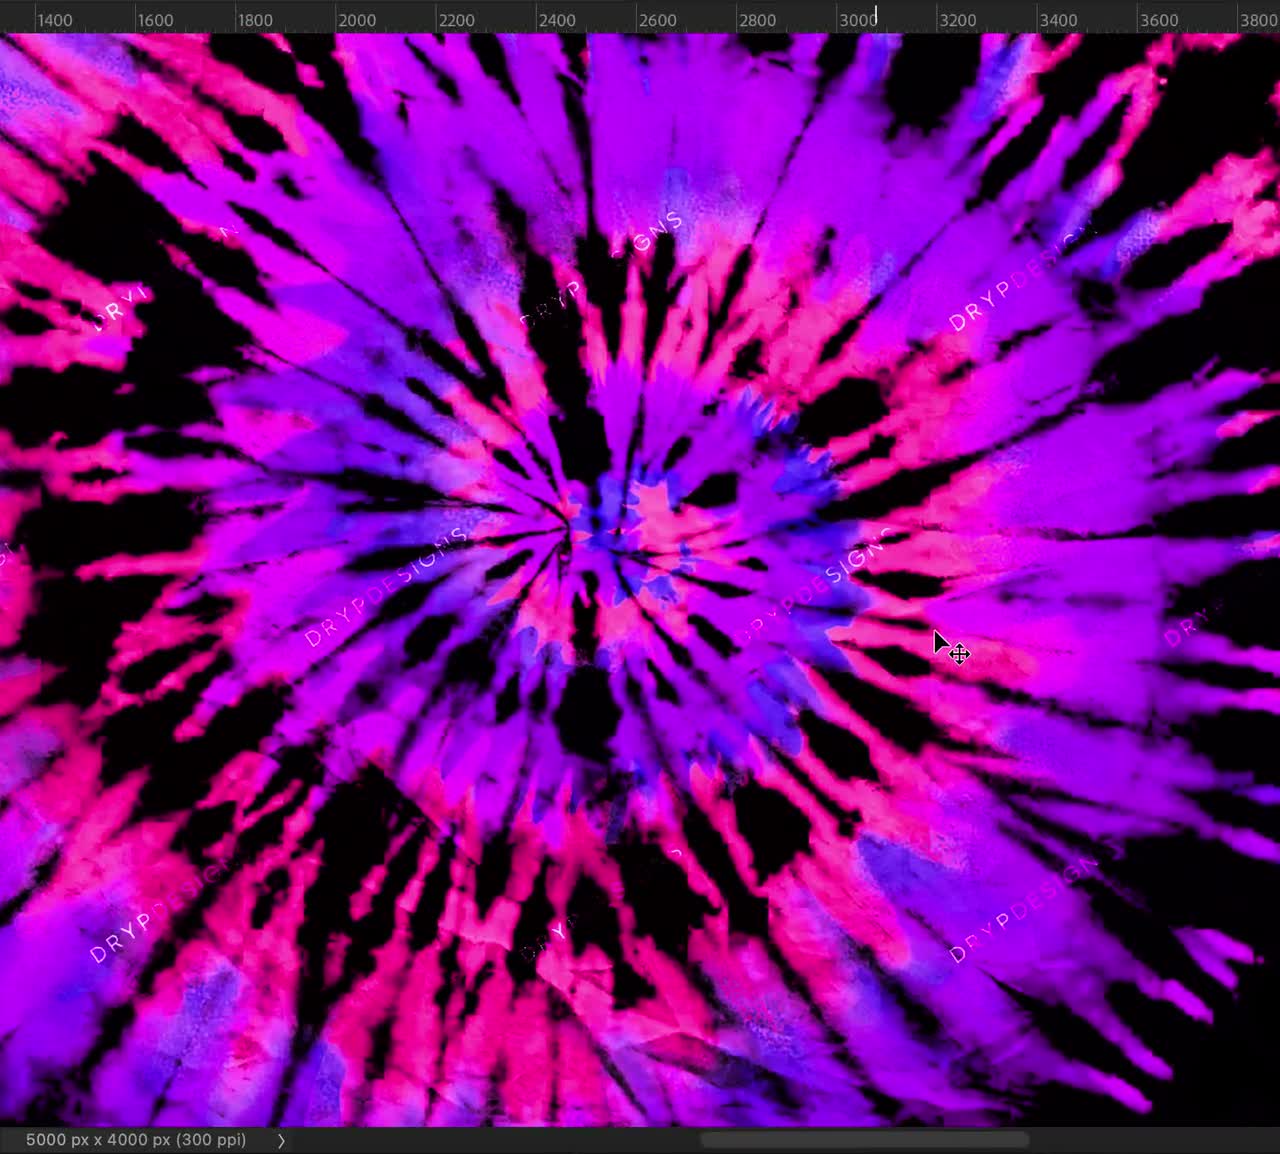 Tie-Dyed Stripes! Pink and purple cropped t-shirt speed dye 